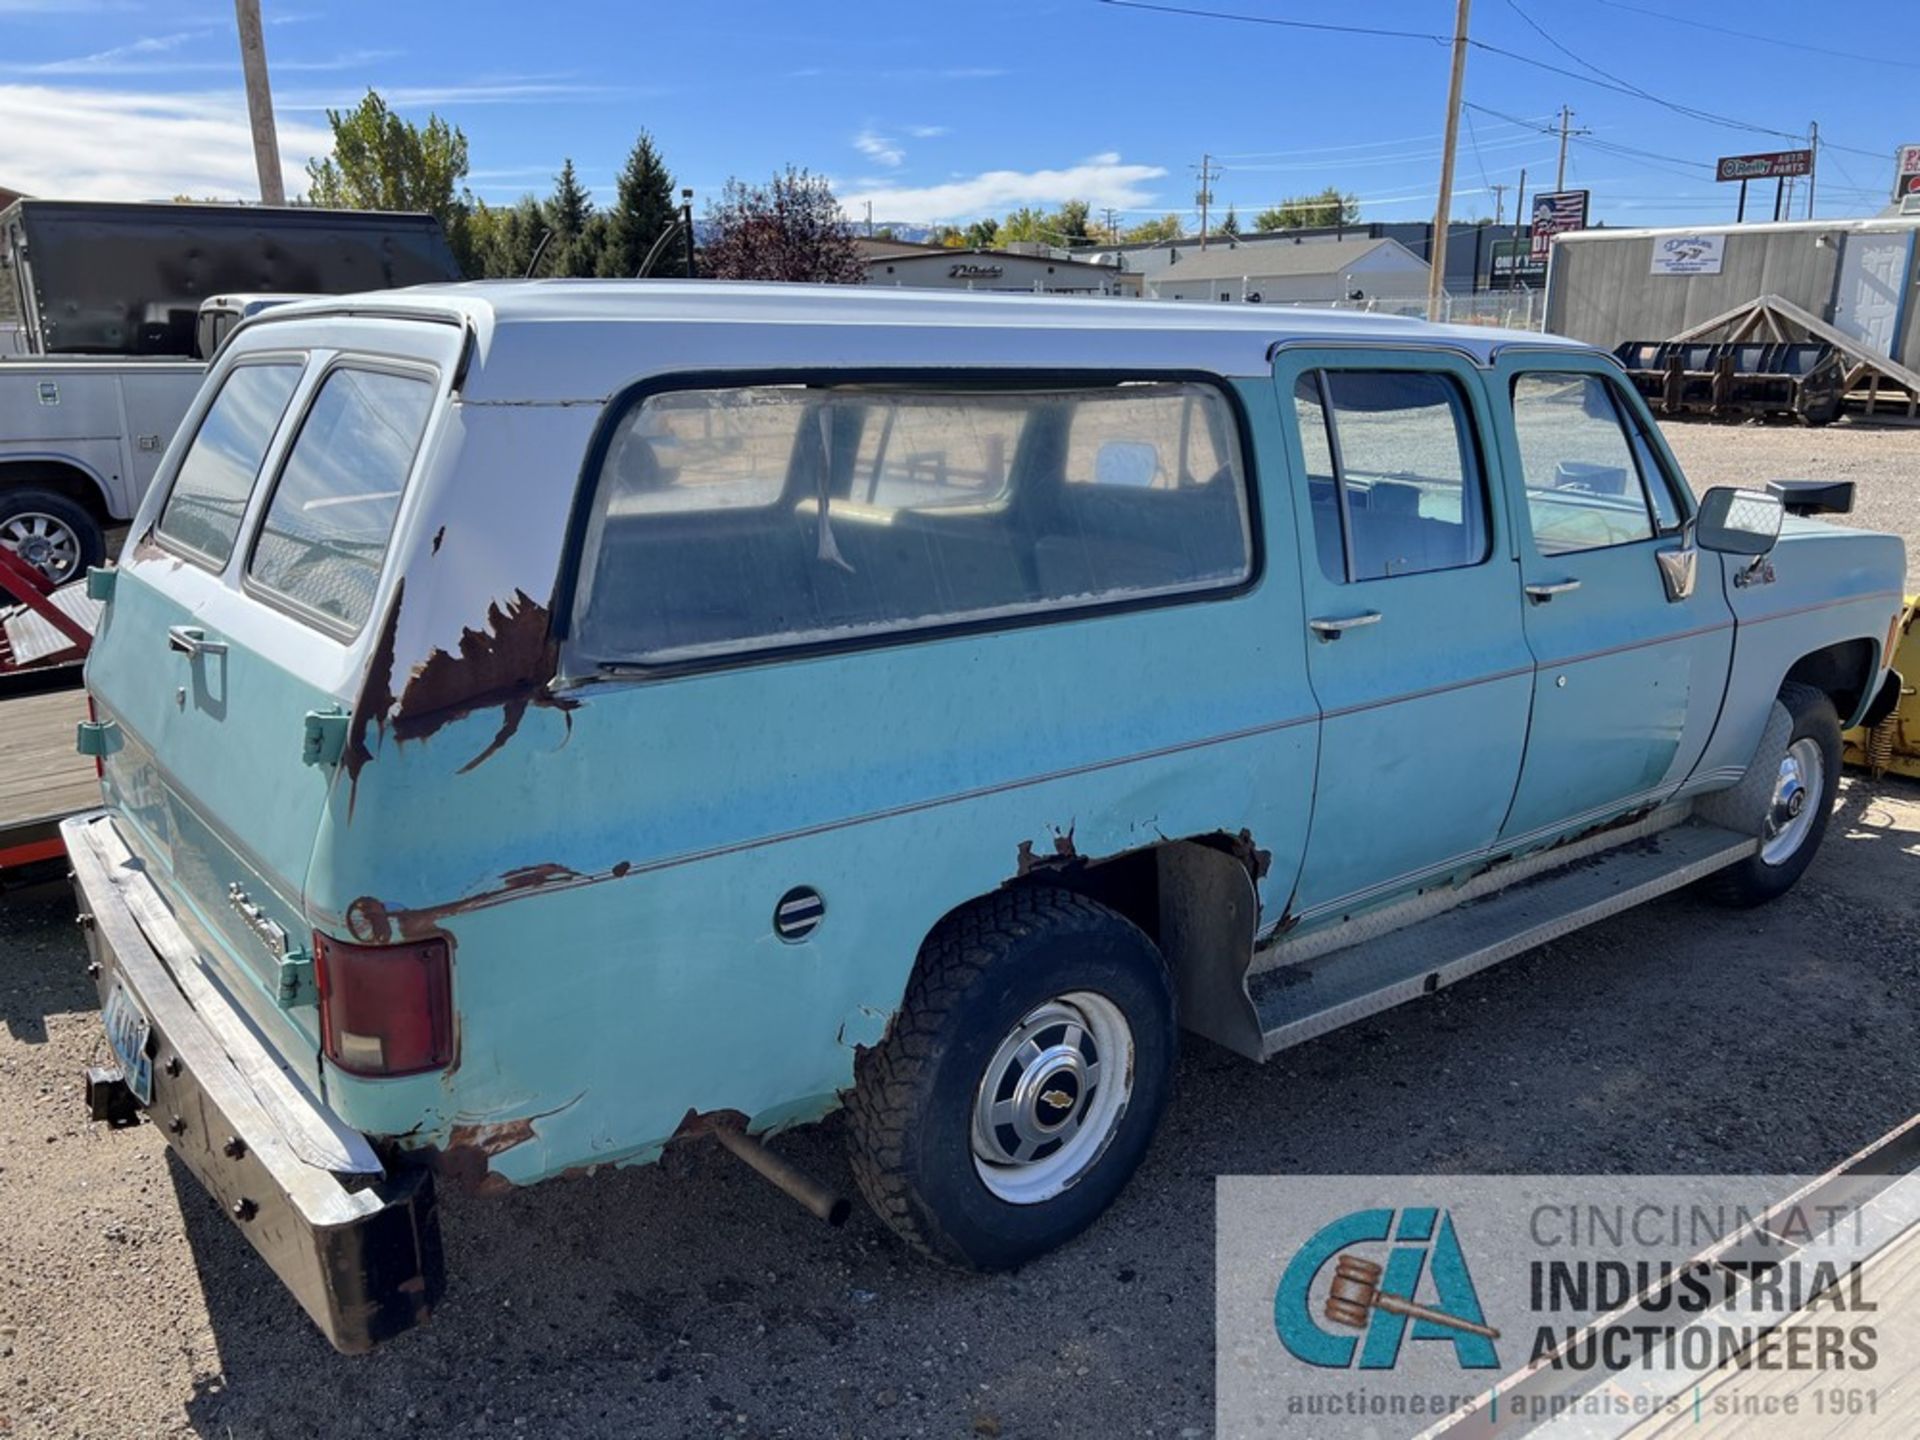 1978 CHEVY CUSTOM DELUX 2 WITH SNOW PLOW; VIN CKU268F128647, GASOLINE ENGINE, AUTOMATIC - Image 3 of 10